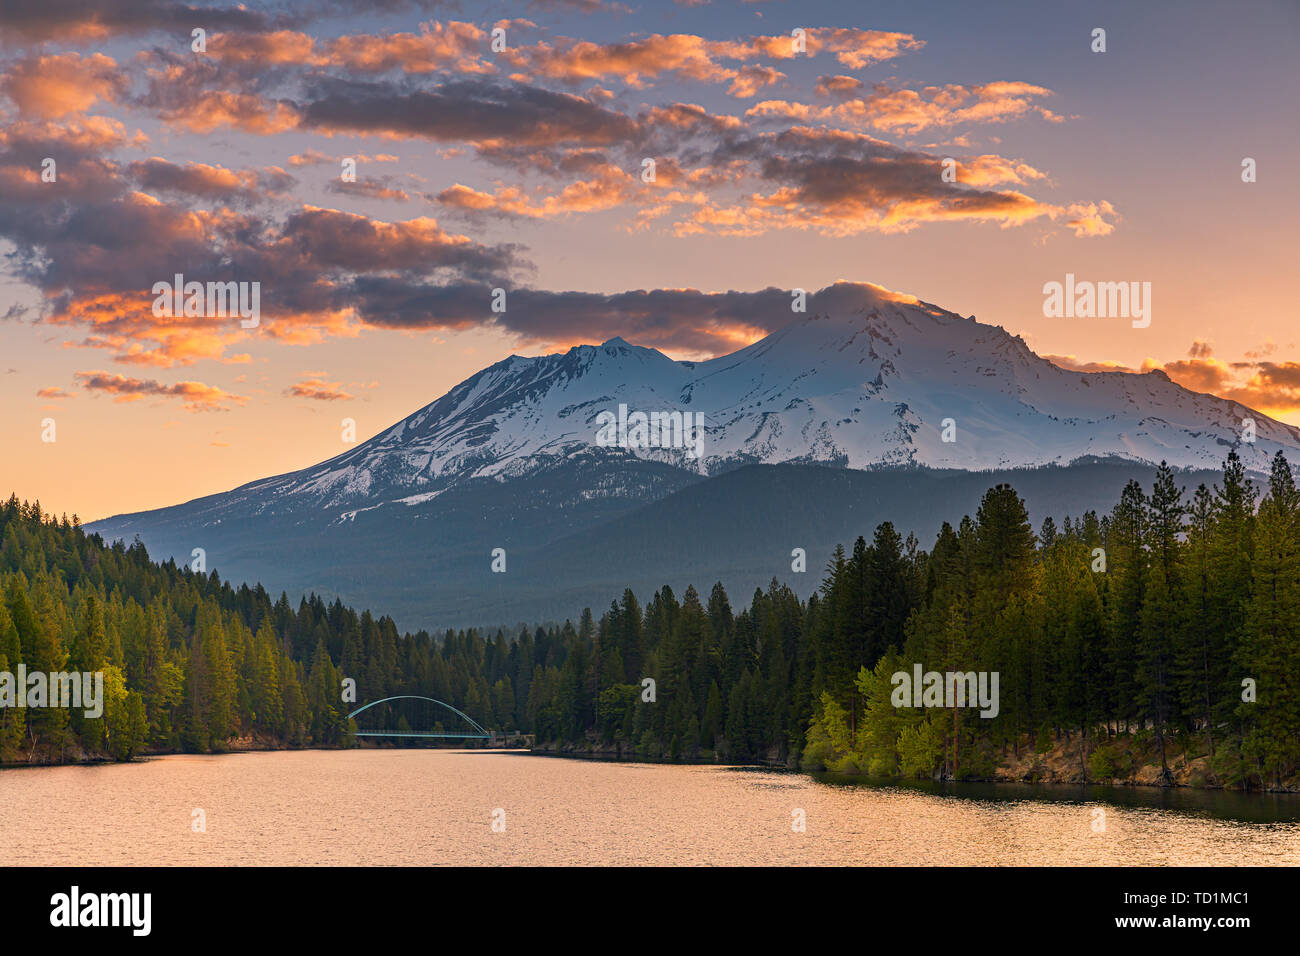 View on Mount Shasta (from Lake Siskiyou). Mt Shasta is a volcano at the southern end of the Cascade Range in Siskiyou County, California. At an eleva Stock Photo